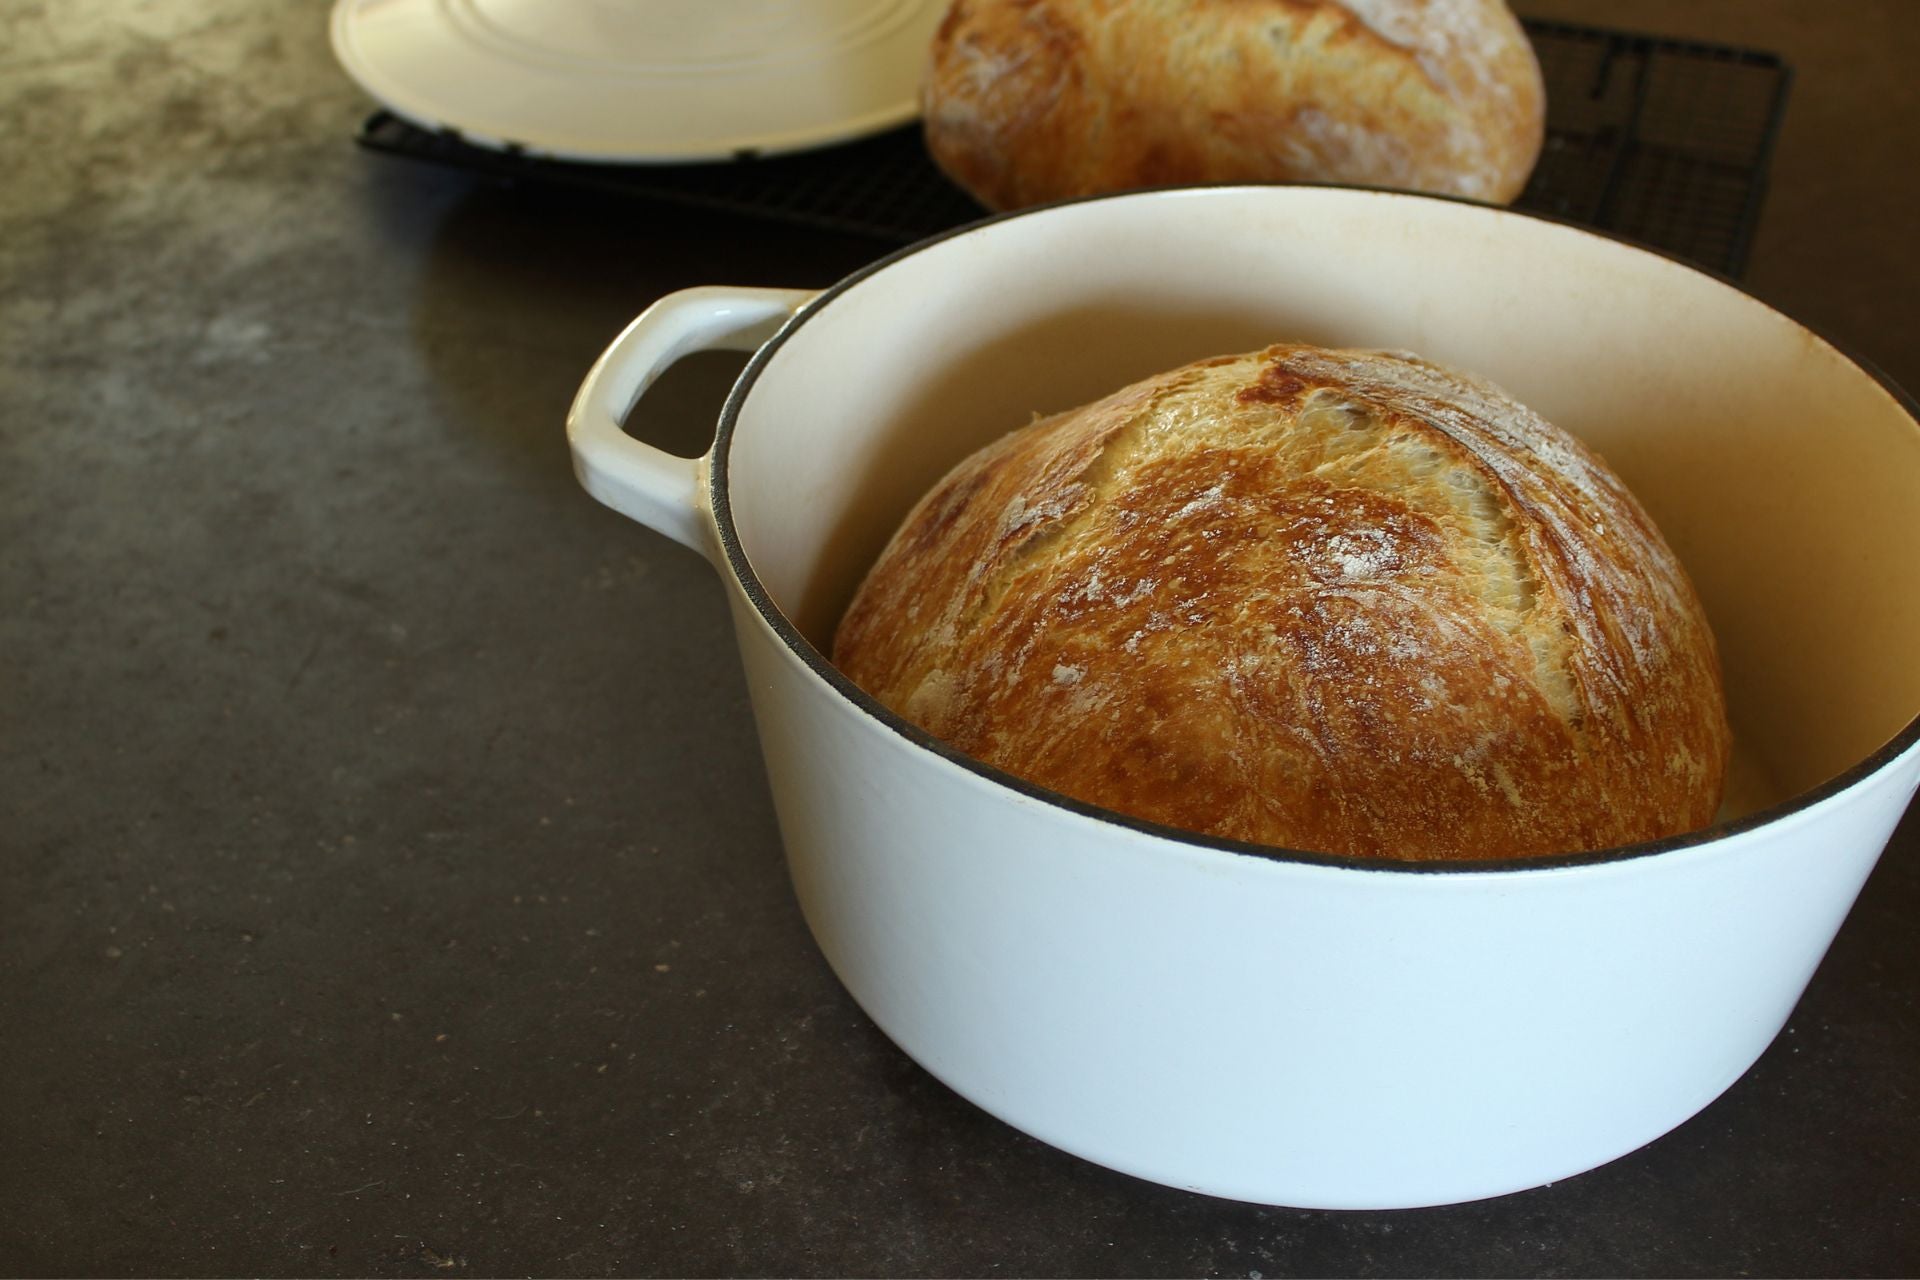 A freshly baked loaf of bread inside a Dutch oven